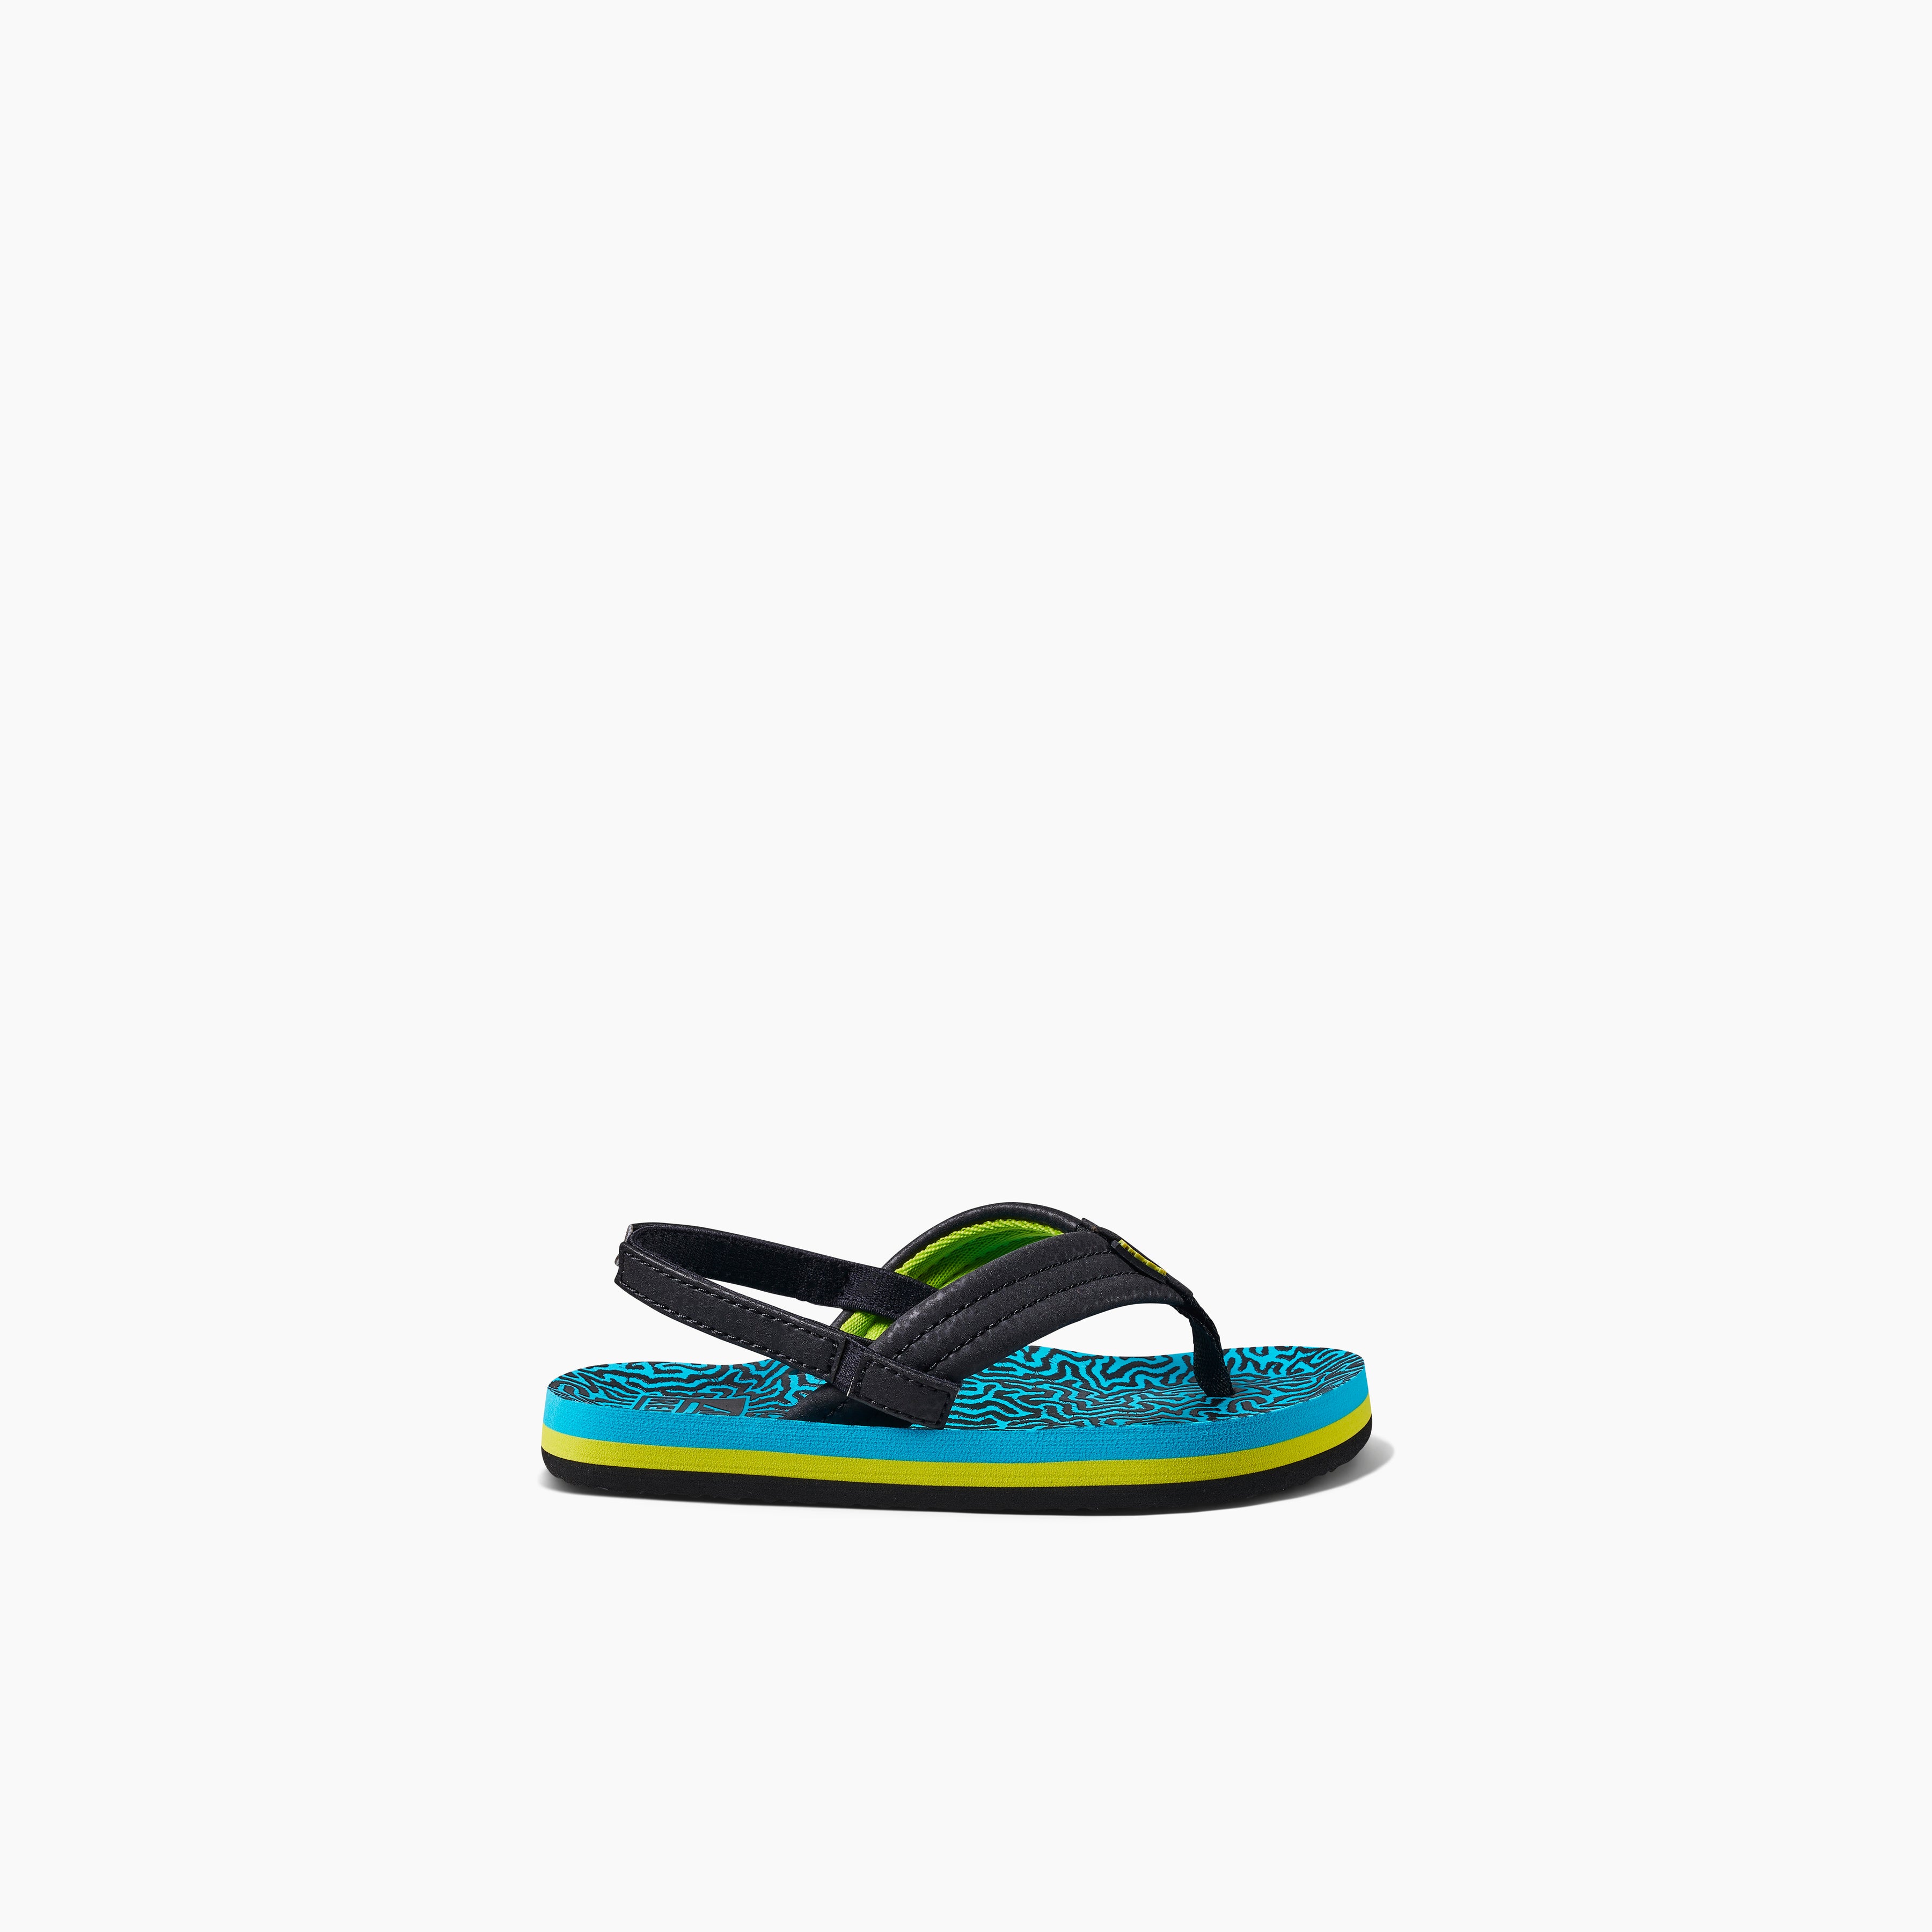 Boy's Little Ahi Sandals in Blue Coral side view